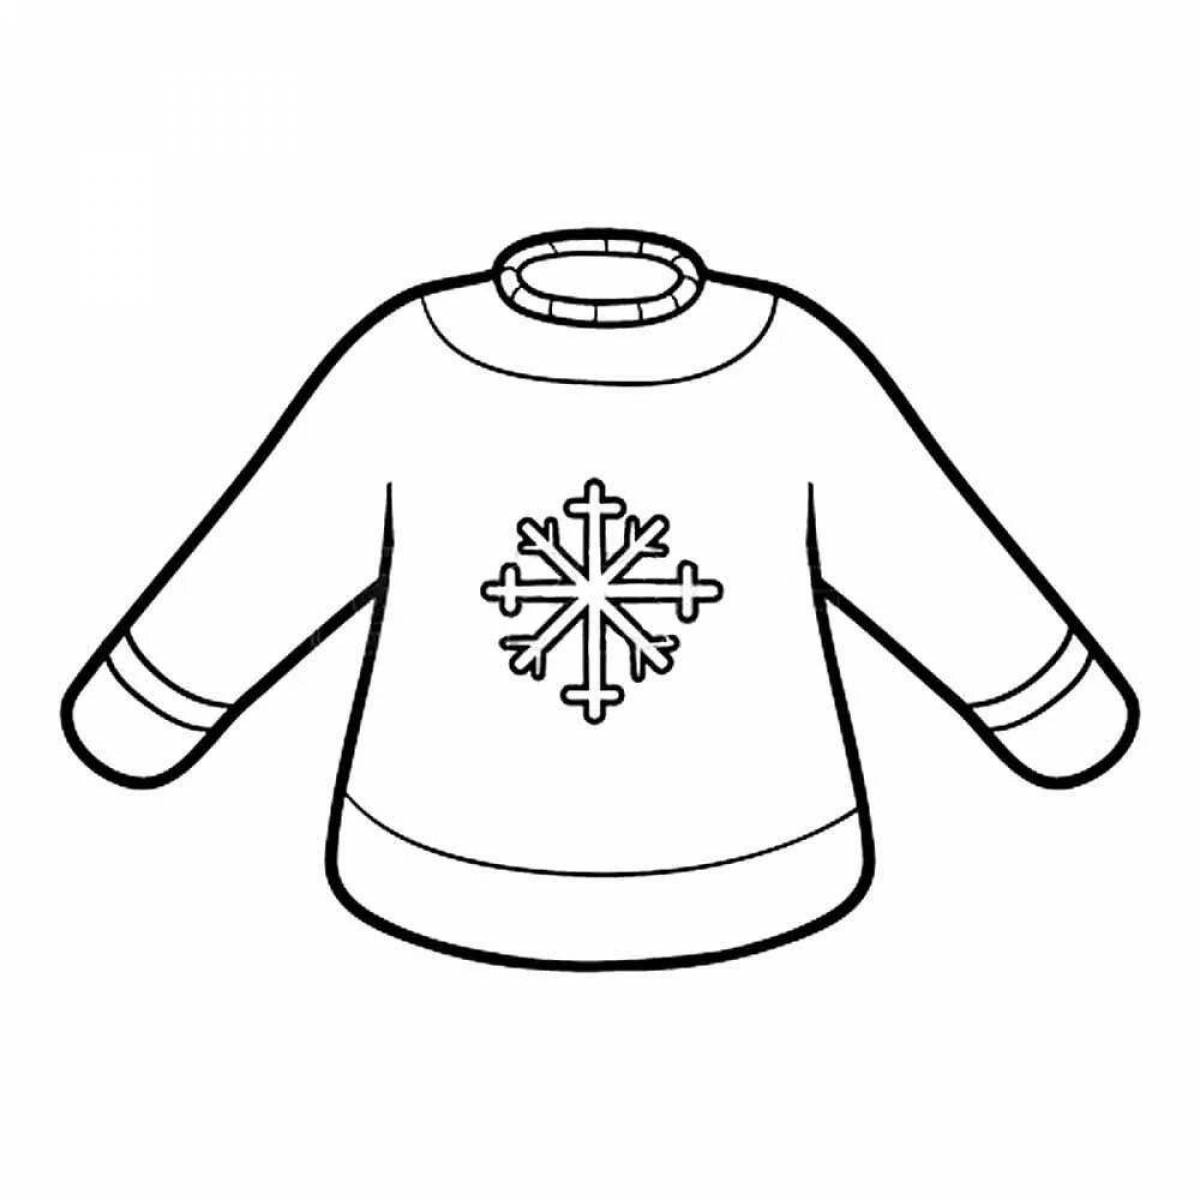 A fun sweater coloring book for 4-5 year olds